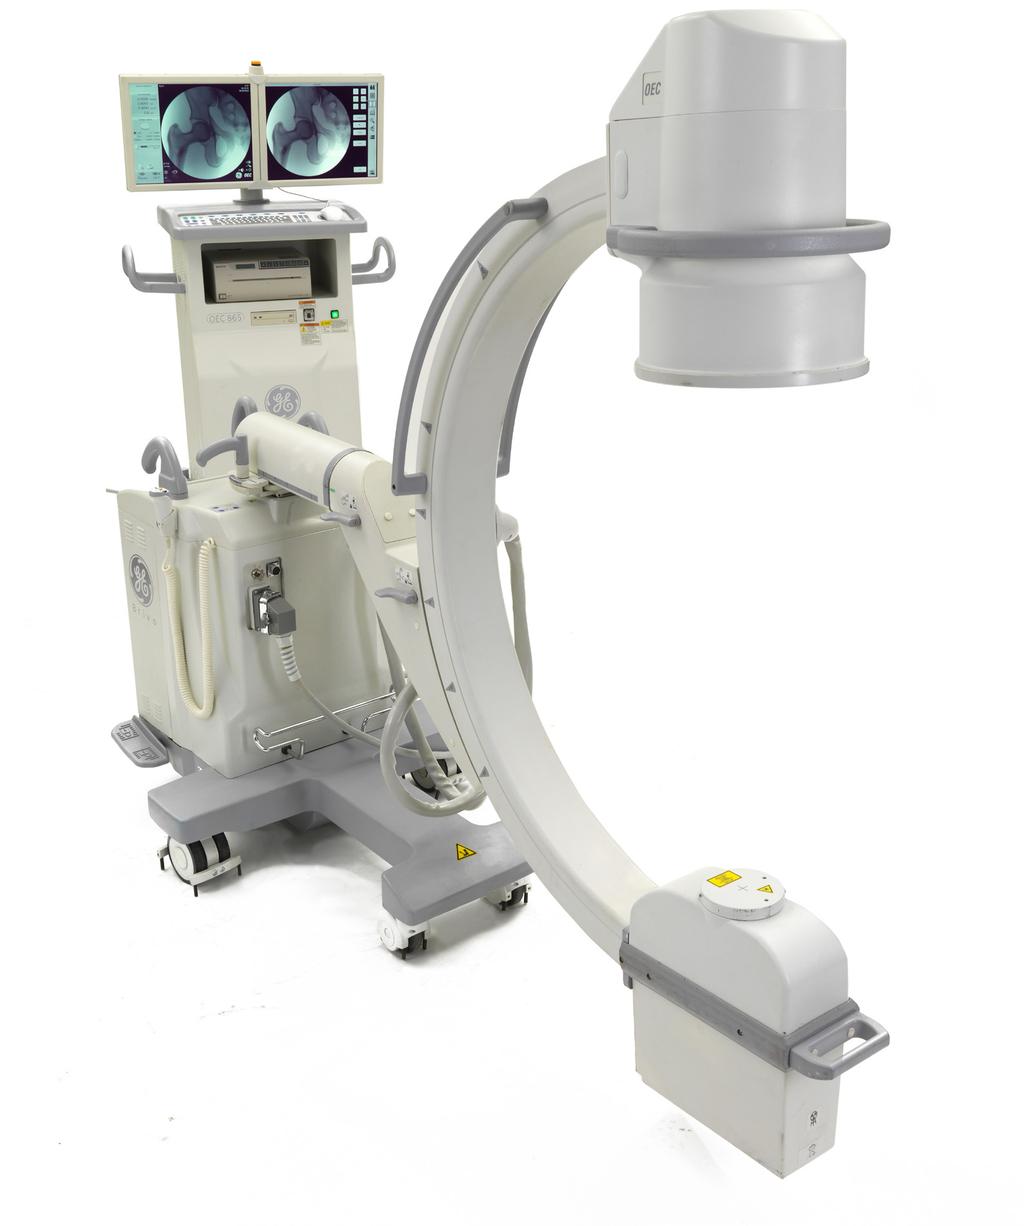 Introducing the OEC Brivo Plus For more than four decades, OEC has been committed to delivering highquality, innovative advances in mobile surgical imaging and supporting millions of successful